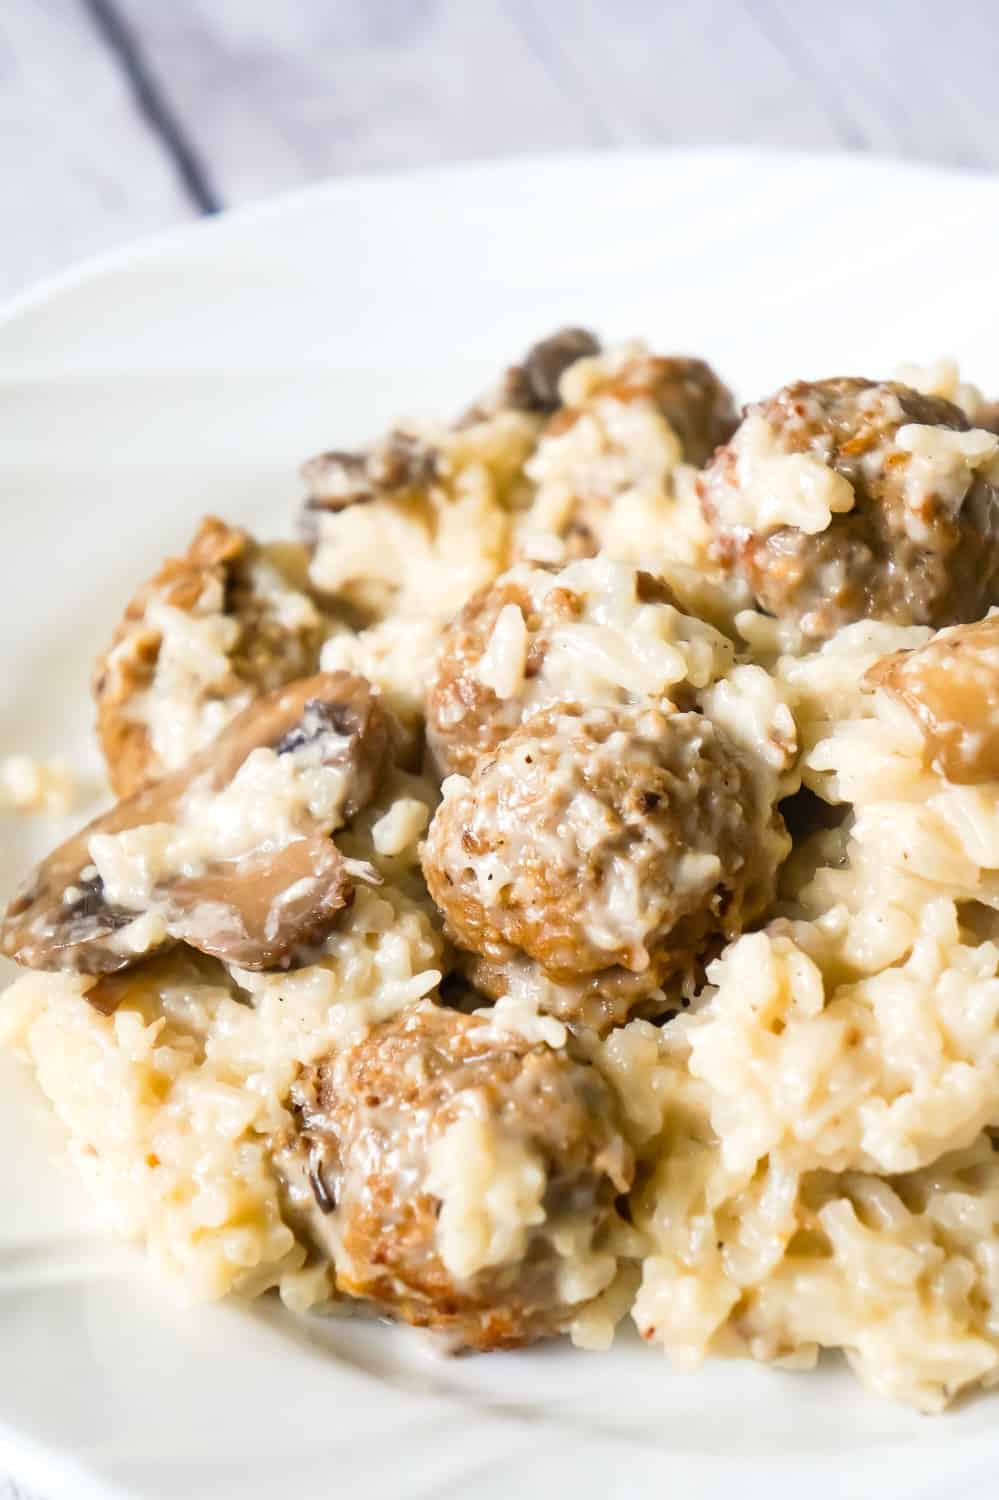 Instant Pot Creamy Mushroom Meatballs and Rice is an easy dinner recipe perfect for weeknights. This hearty dish is loaded with meatballs, long grain white rice and sliced mushrooms.